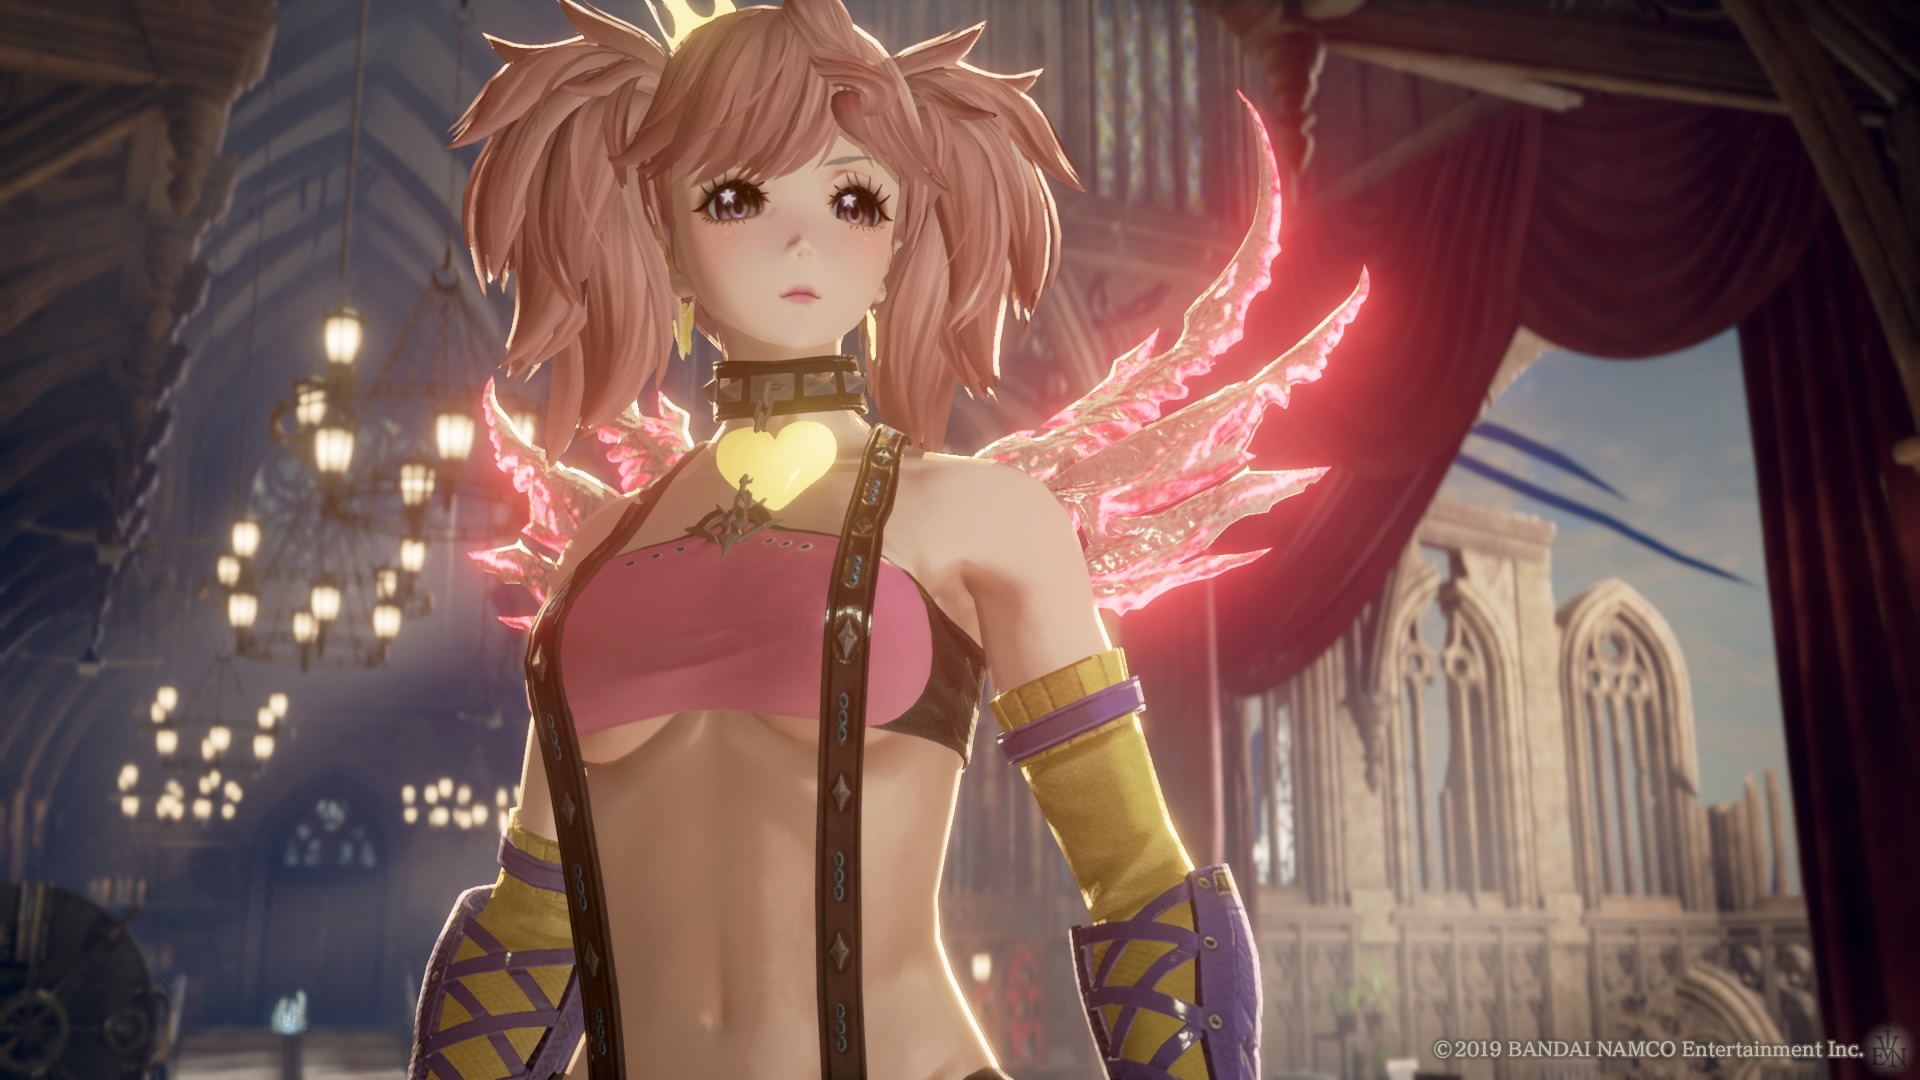 Code Vein review: Take my blood